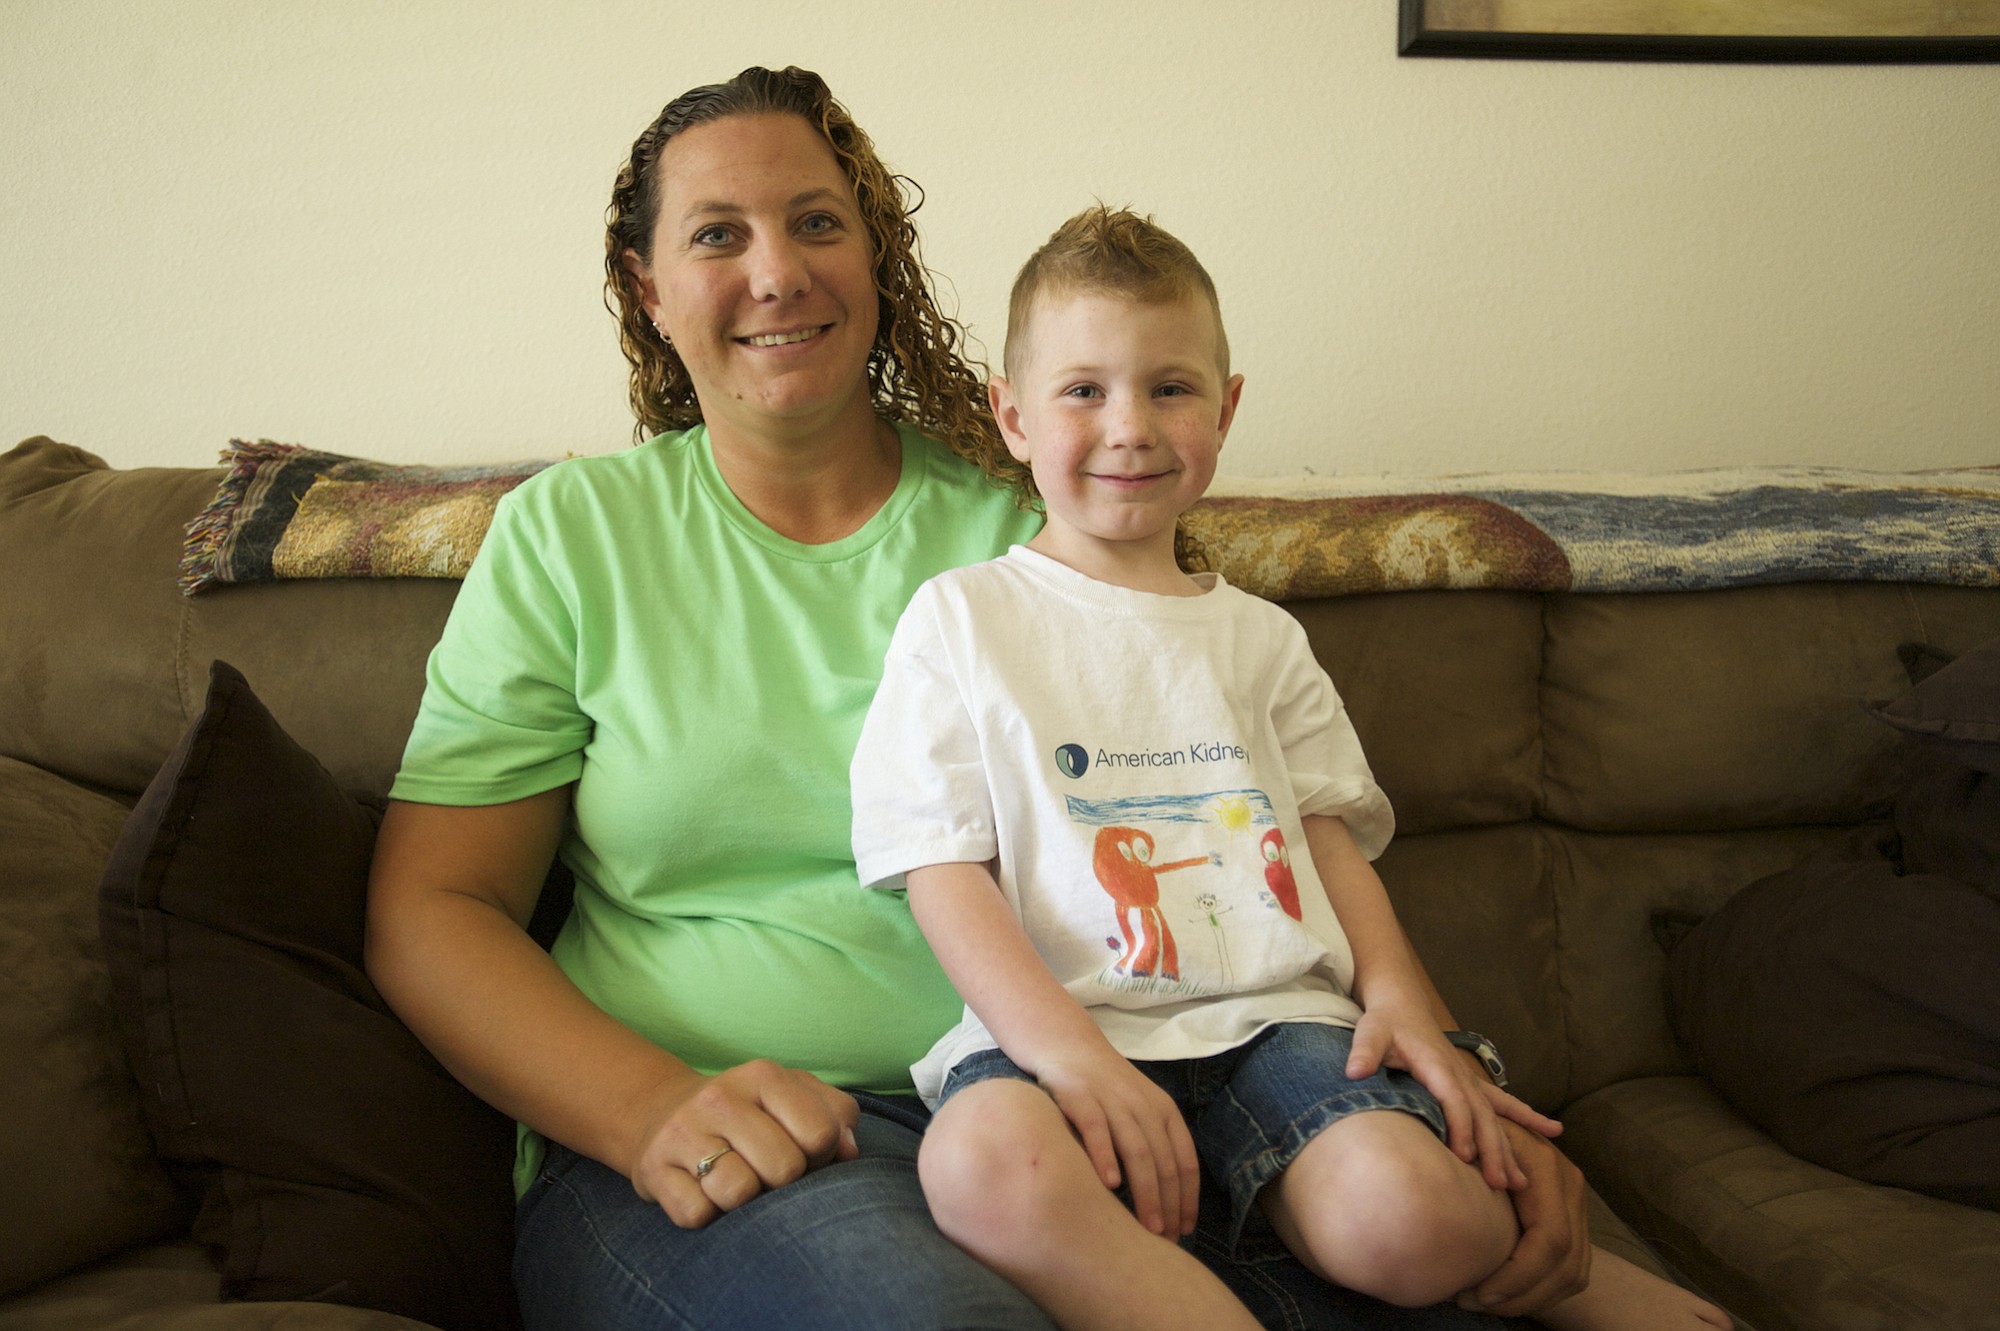 Five-year-old Ethan Norton and his mom, Breanna, are adjusting to life after Ethan's January diagnosis of nephrotic syndrome, a kidney disorder.